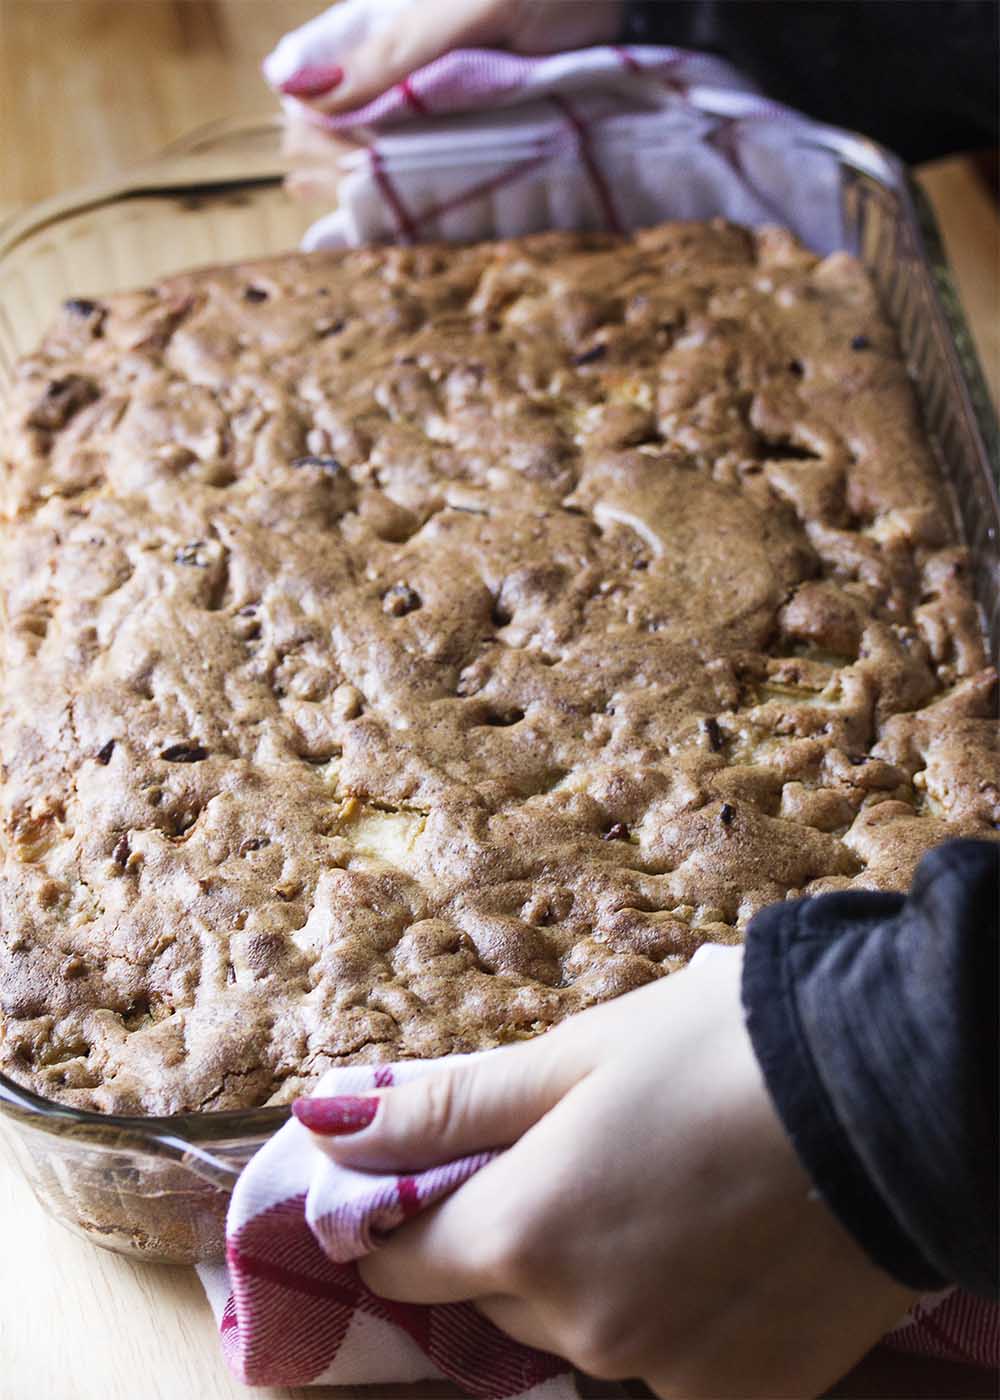 A large baking dish being held up of freshly made cake hot from the oven.